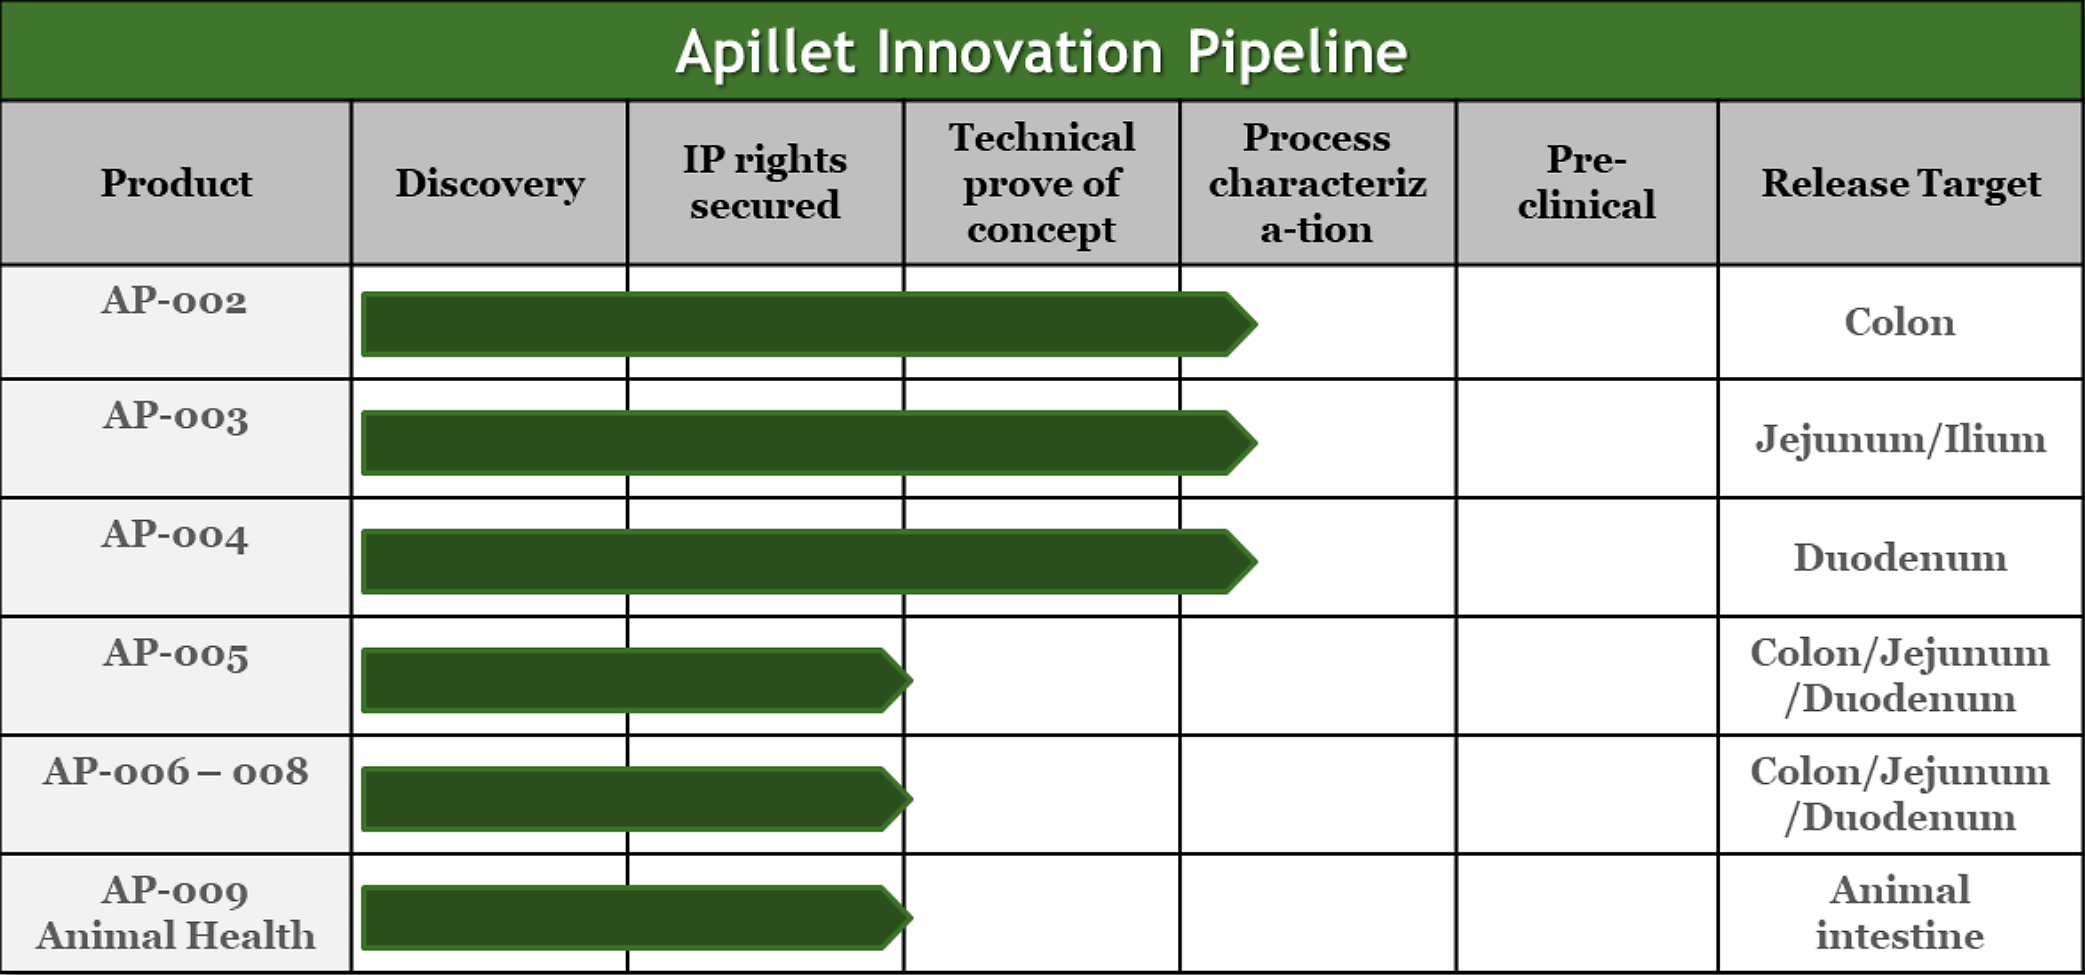 A chart that shows past present and future stages of developments by Apillet